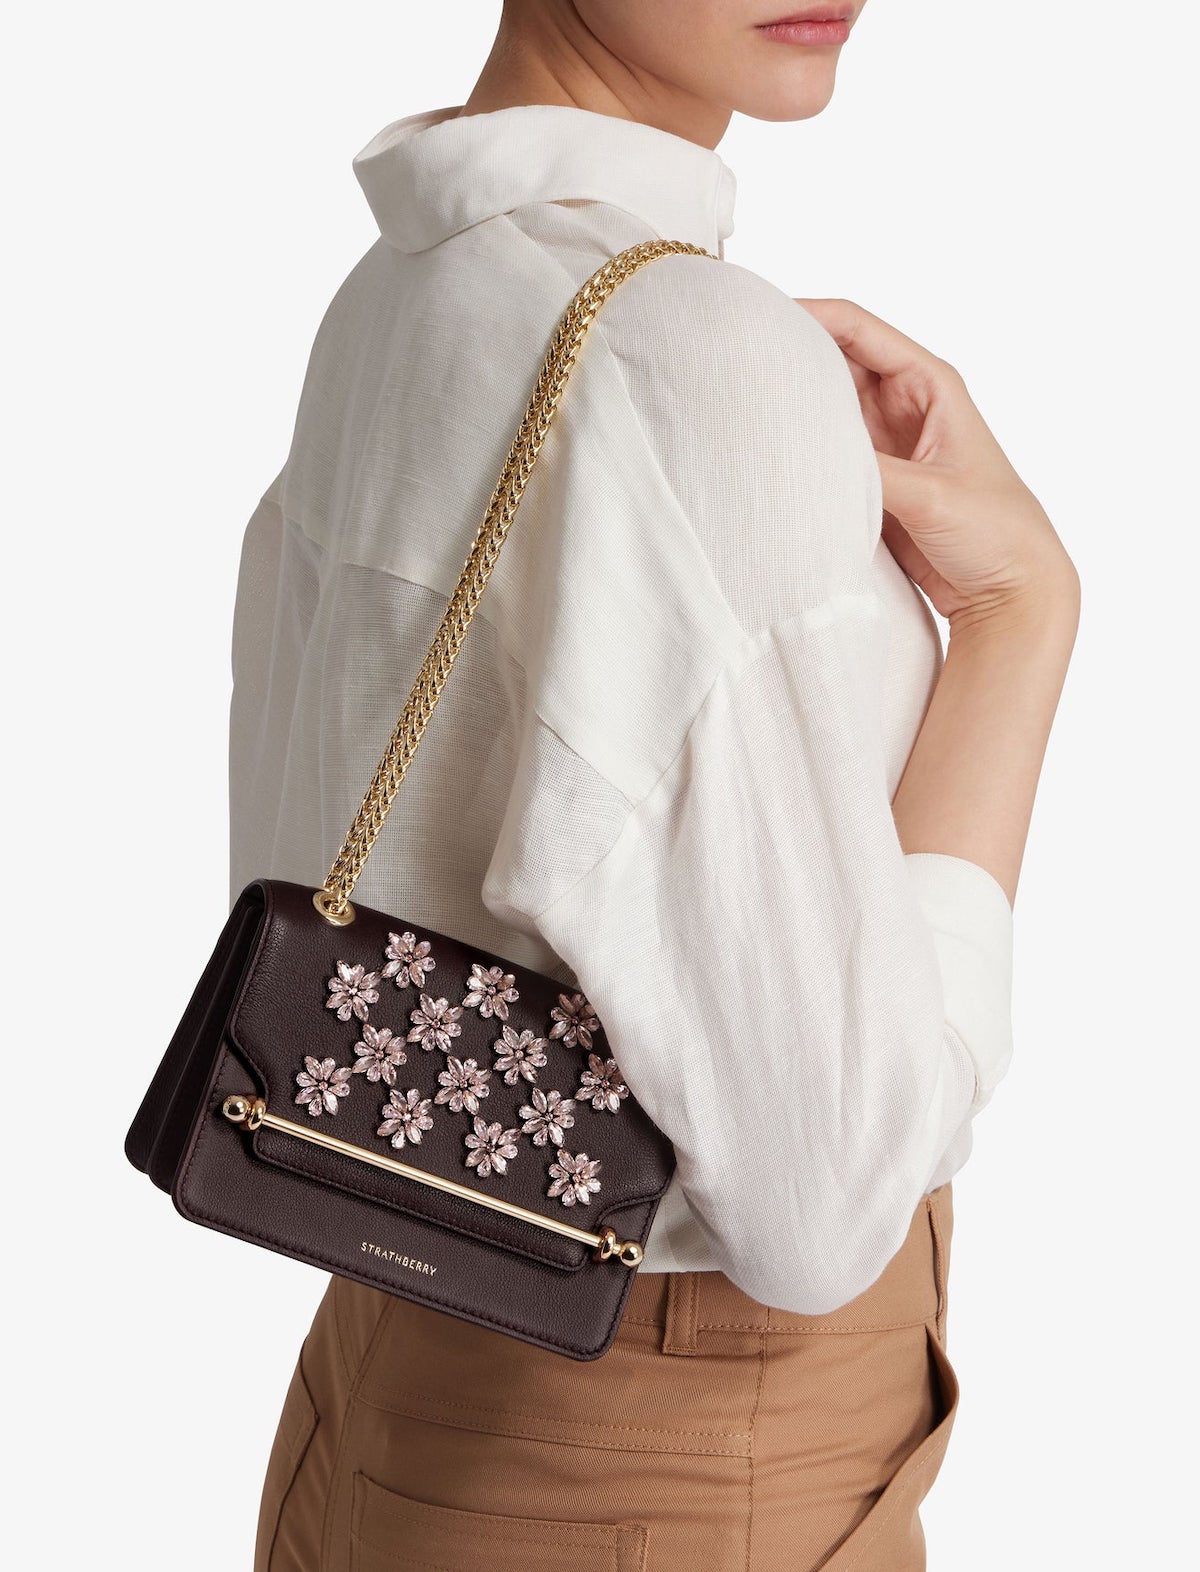 STRATHBERRY East/West Mini Bag in Floral Embroidered Burgundy